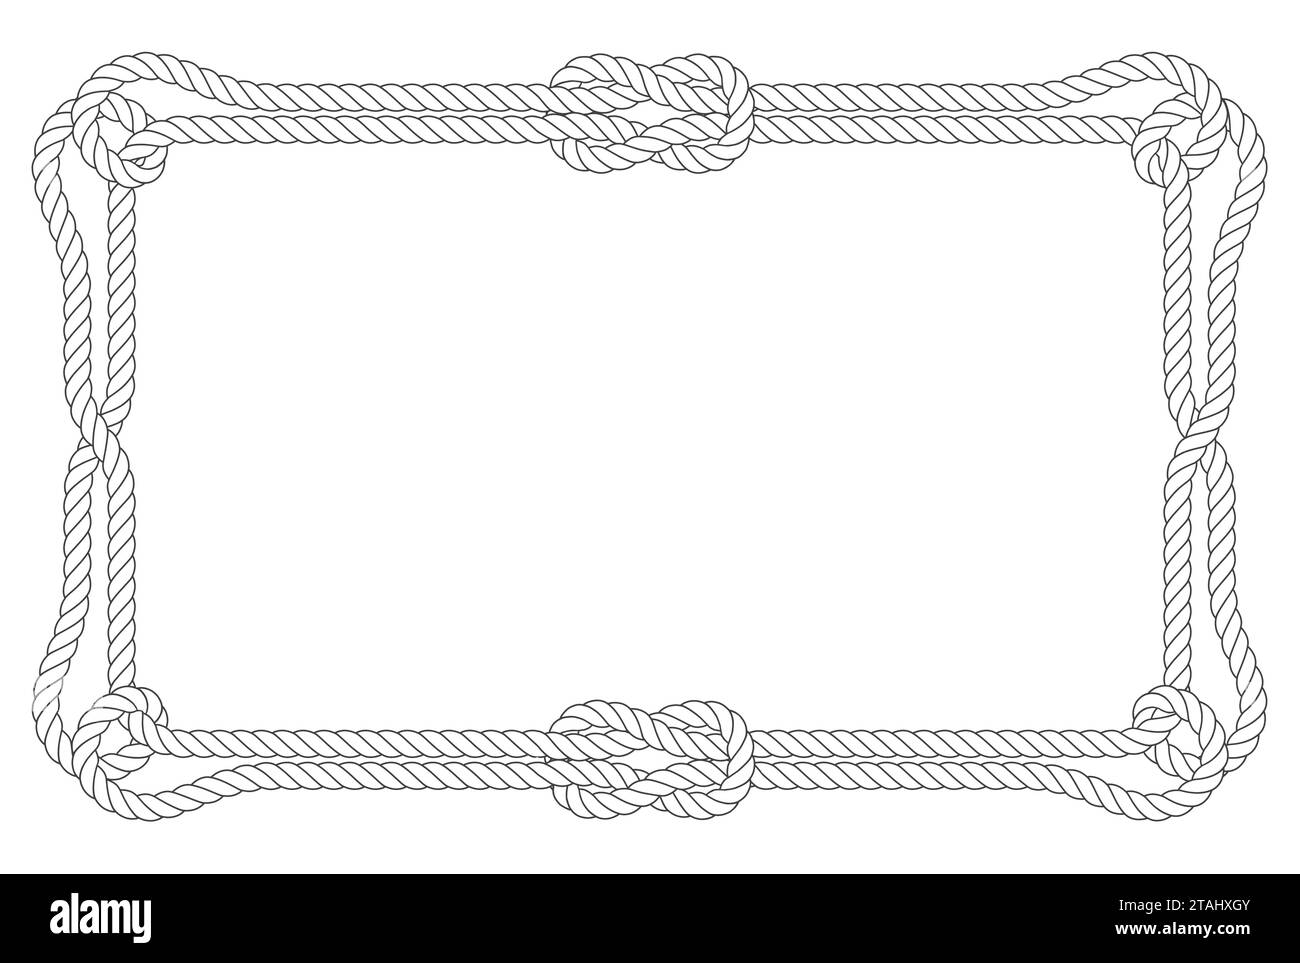 Rope vectors Black and White Stock Photos & Images - Page 2 - Alamy